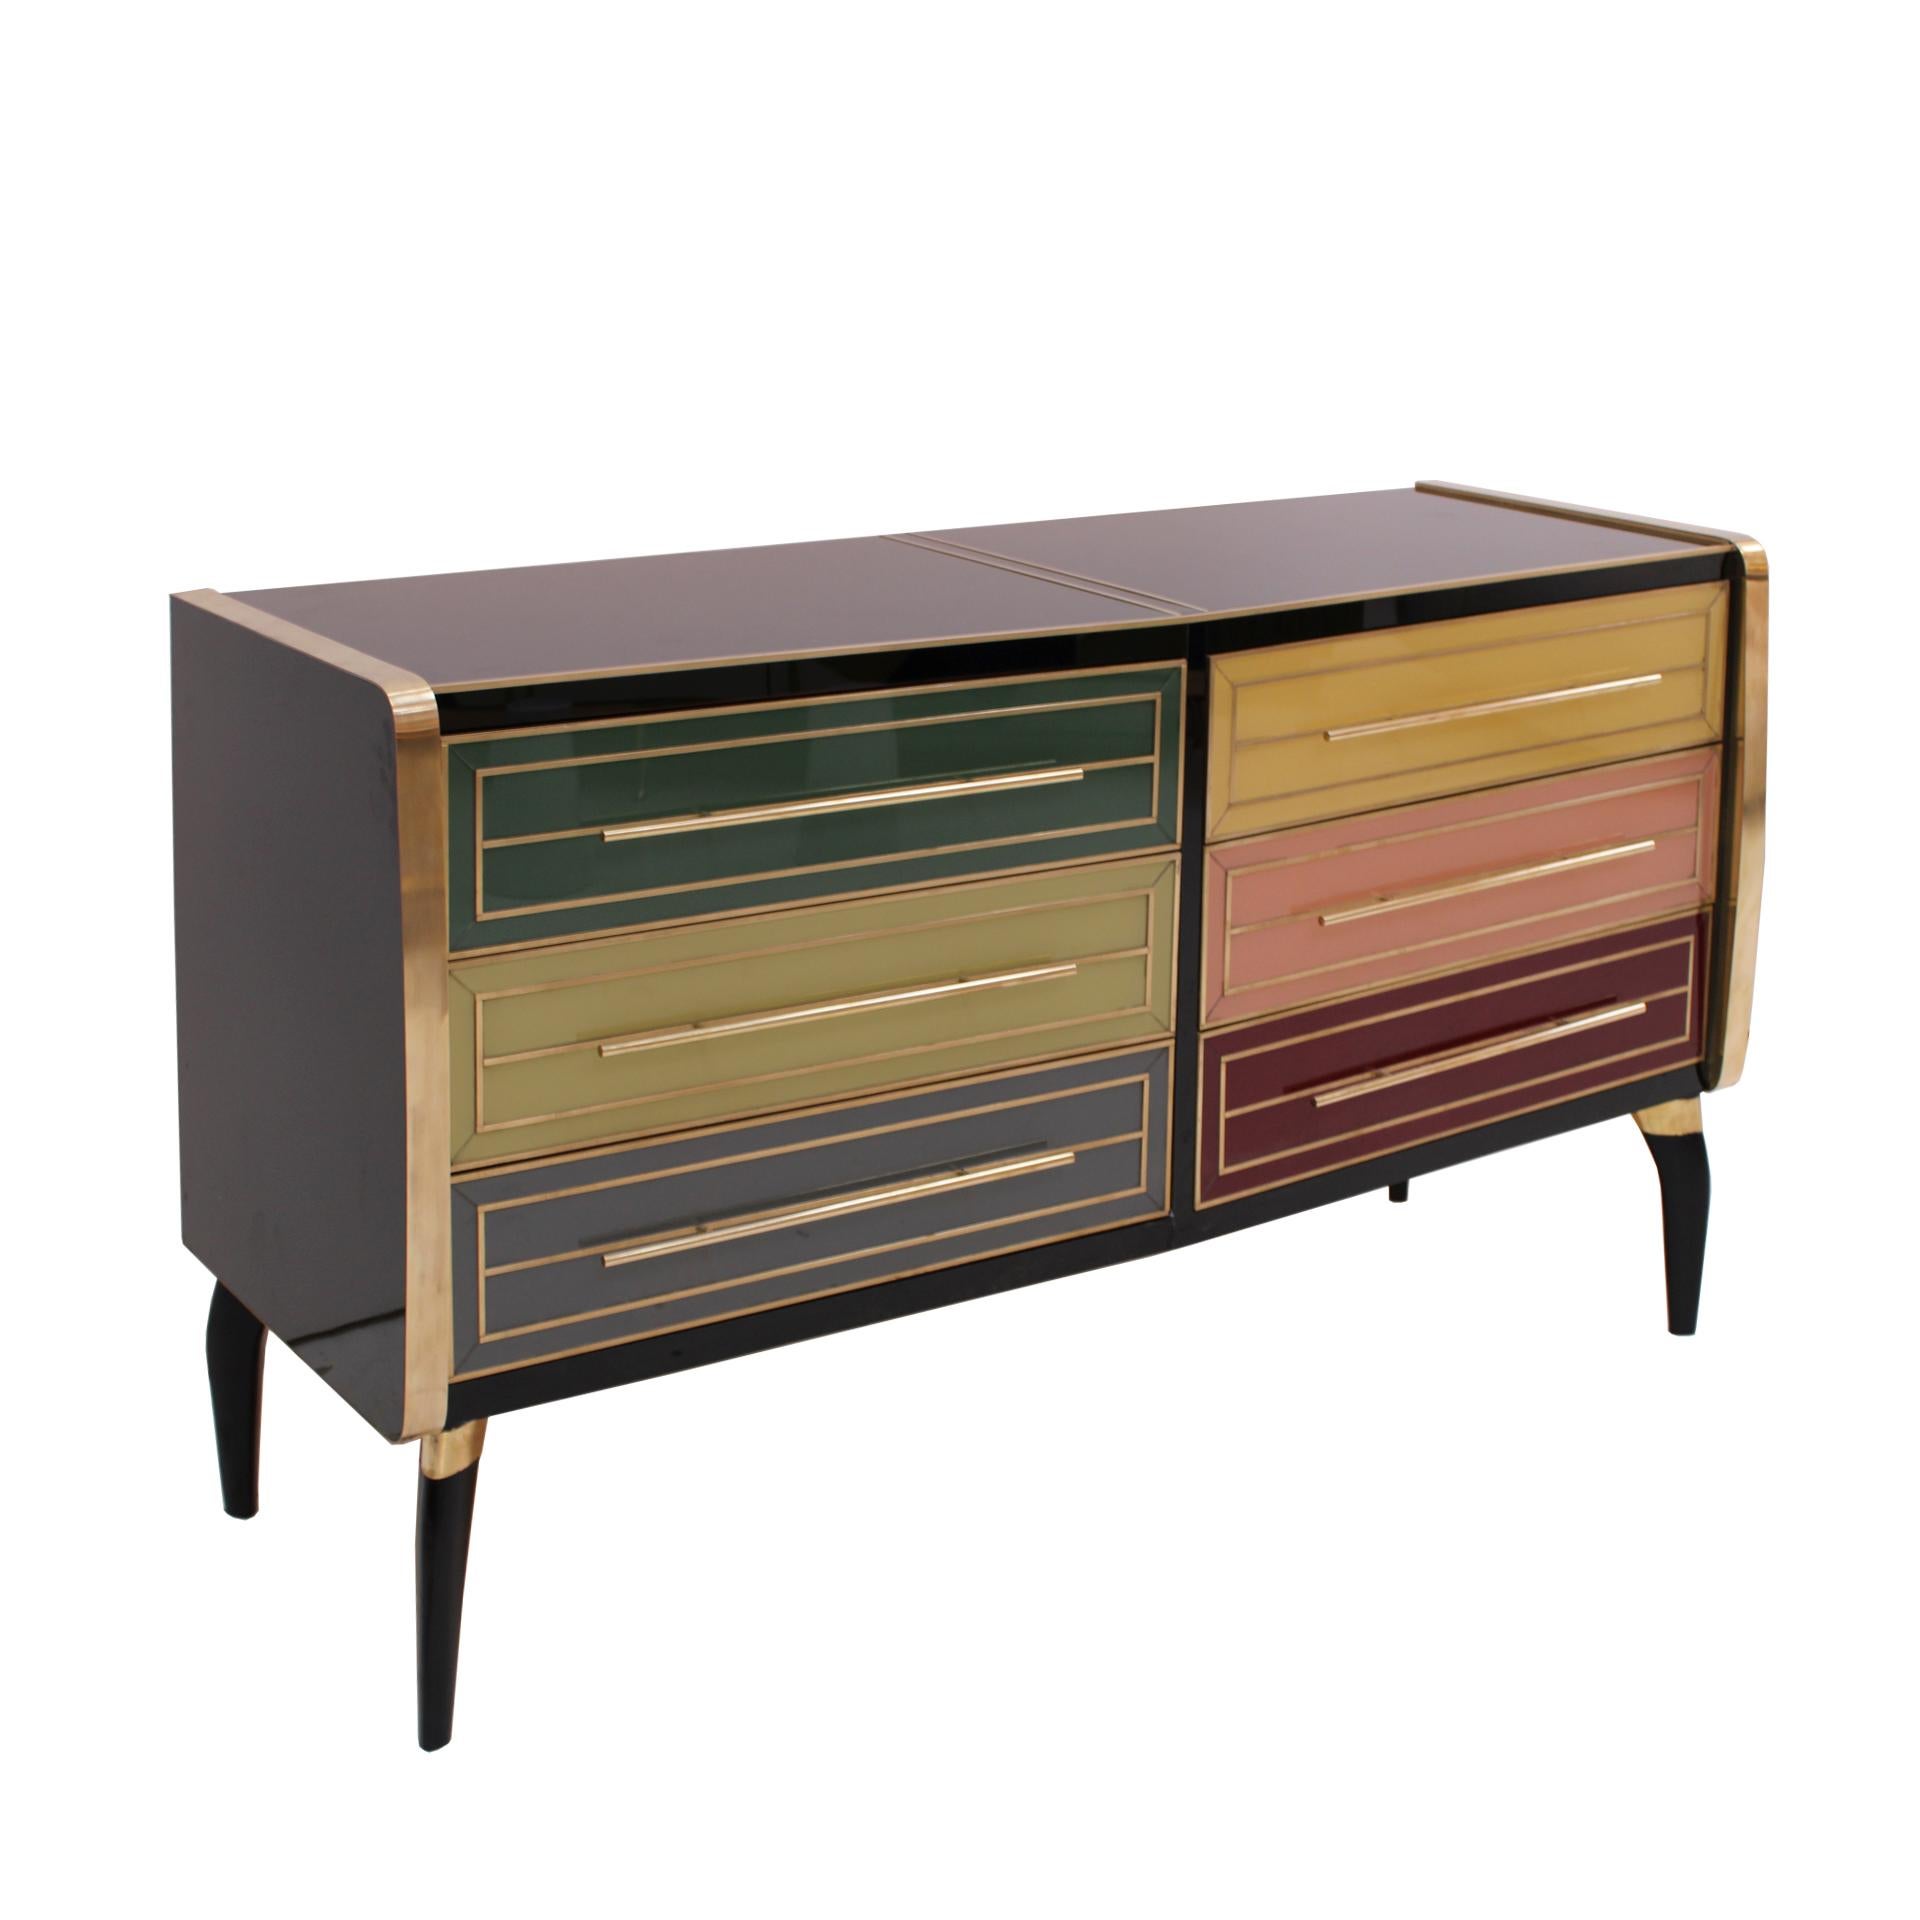 Hand-Crafted Mid-Century Modern Solid Wood and Colored Glass Italian Sideboard For Sale